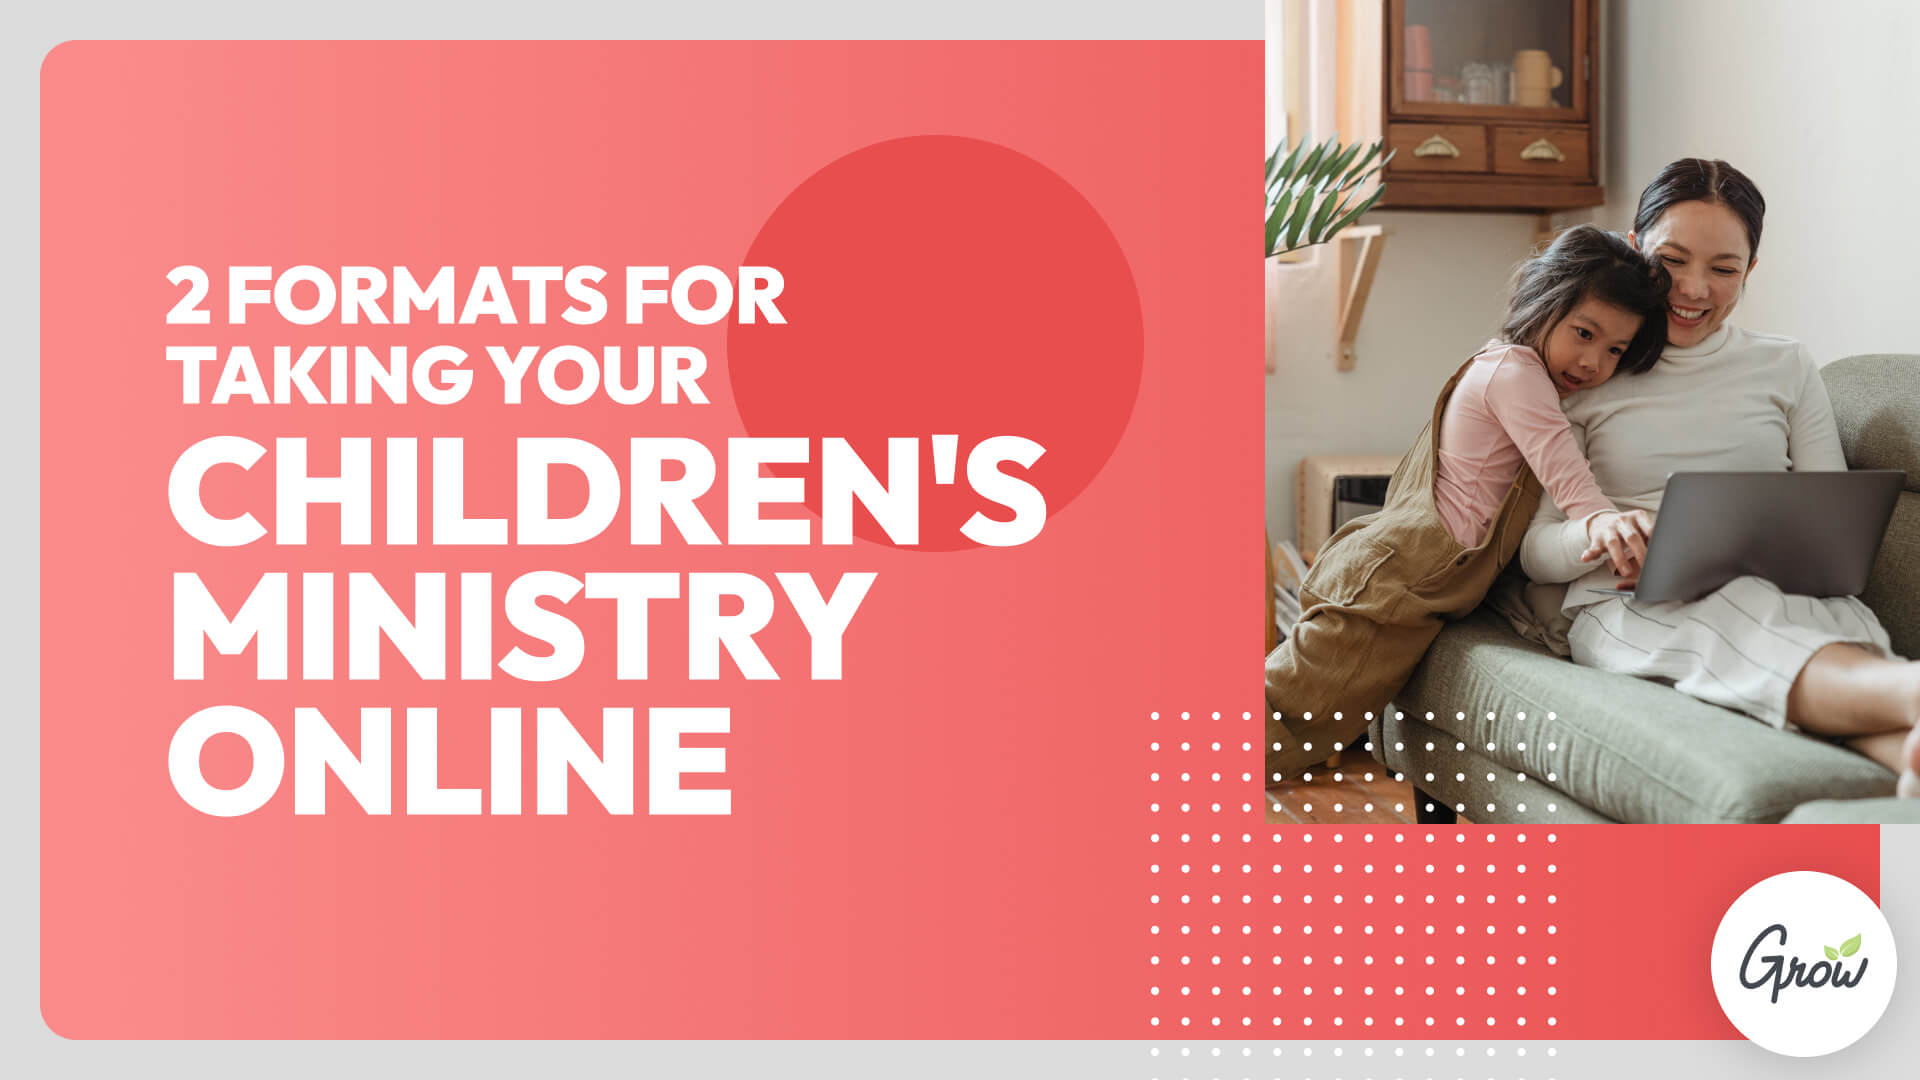 2 Formats for Taking Your Children's Ministry Online